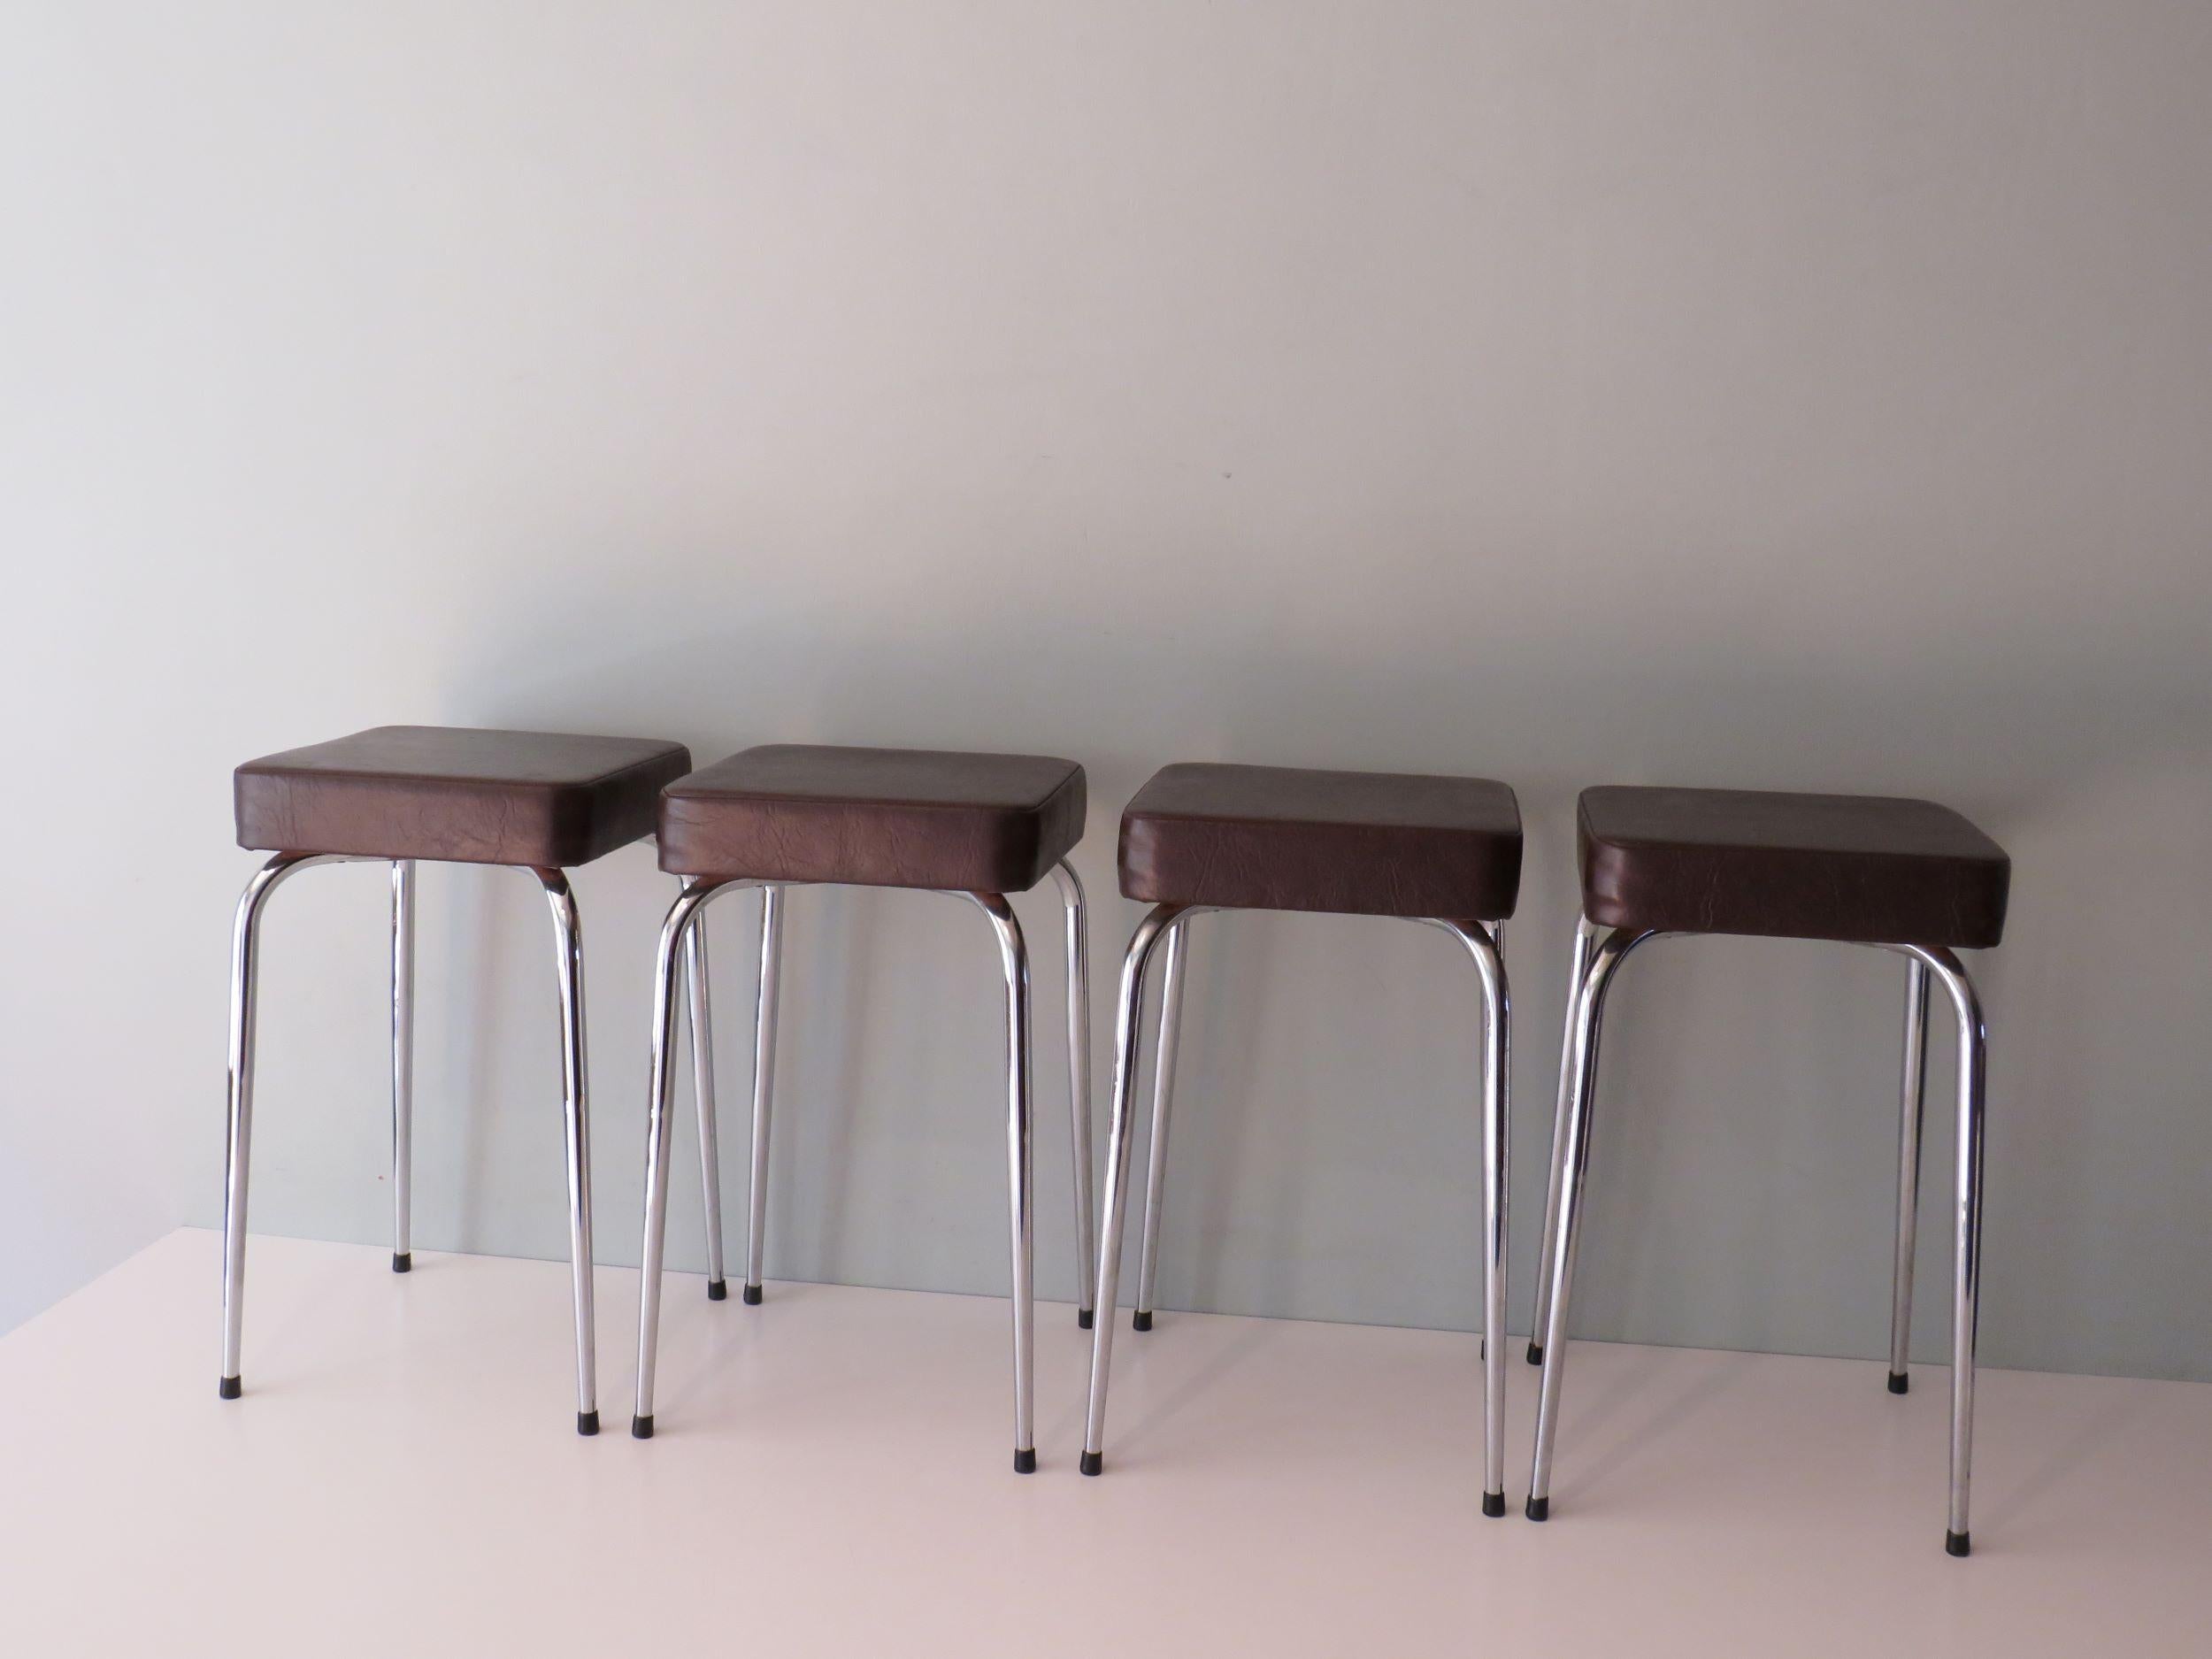 Mid-20th Century Set of 4 Stools, Chrome and Skai by Poelux, Belgium, 1960-1970 For Sale